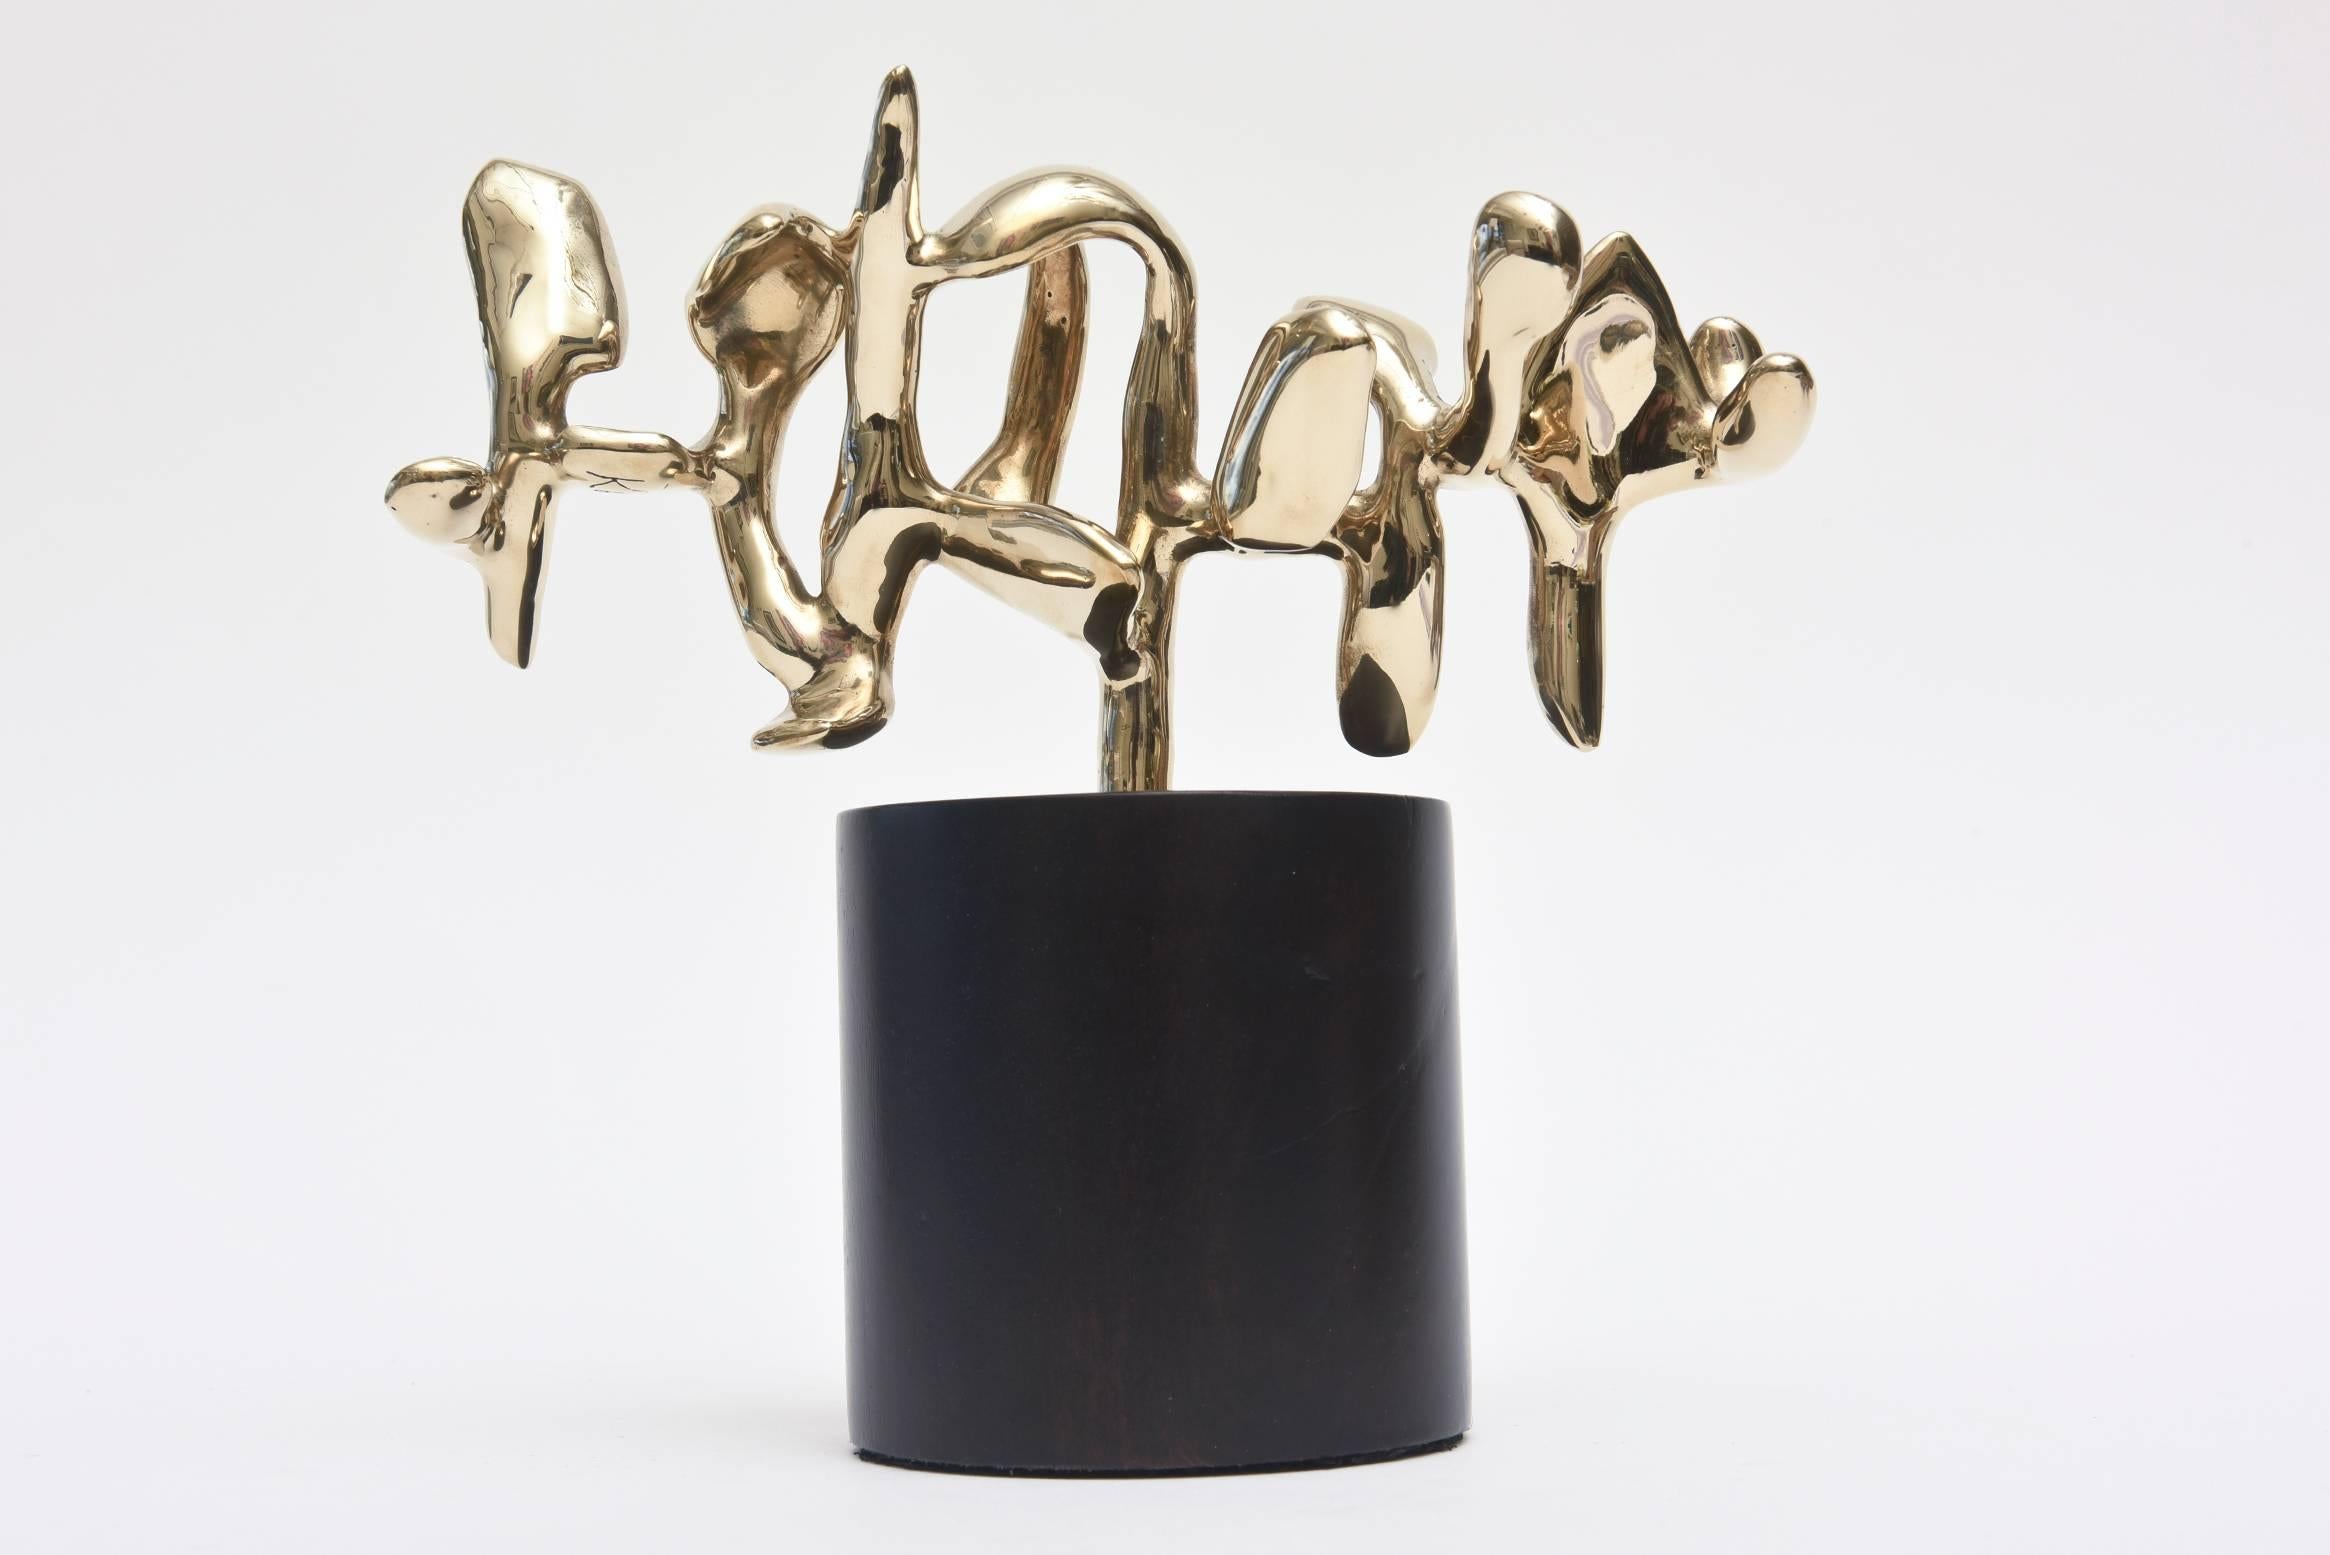 This polished bronze sculpture is on an ebonized wood base is by Eli Karpel, a NY artist. It is signed and of a very small edition. It is a continuum of abstract figures and forms in undulating sequence. The height of the sculpture varies as there